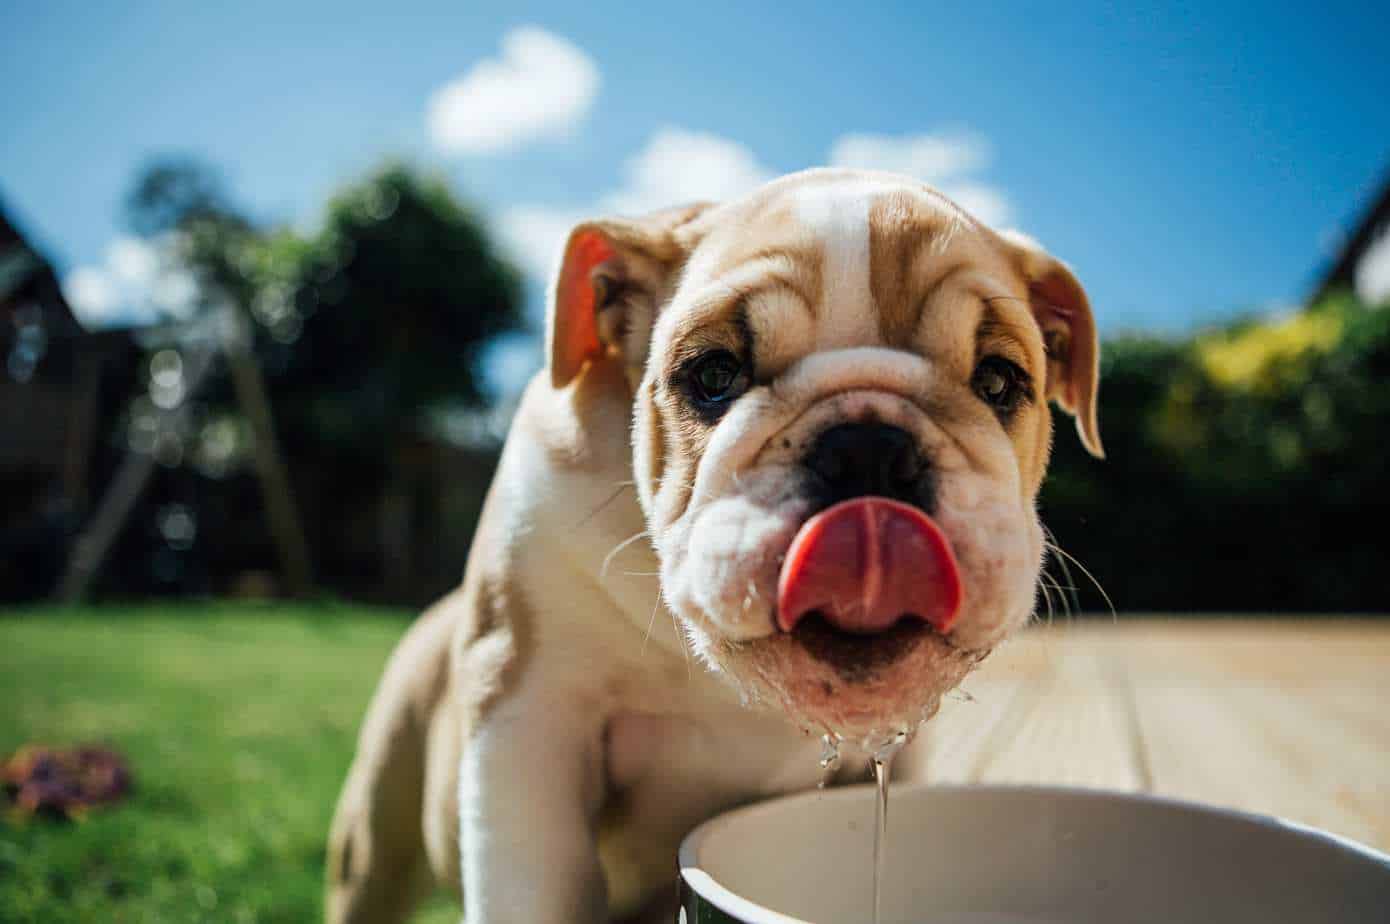 Cute bulldog puppy drinks water. Discuss your dog slobber situation with your veterinarian so that they can check your dog's oral health and perform specific diagnostic tests.